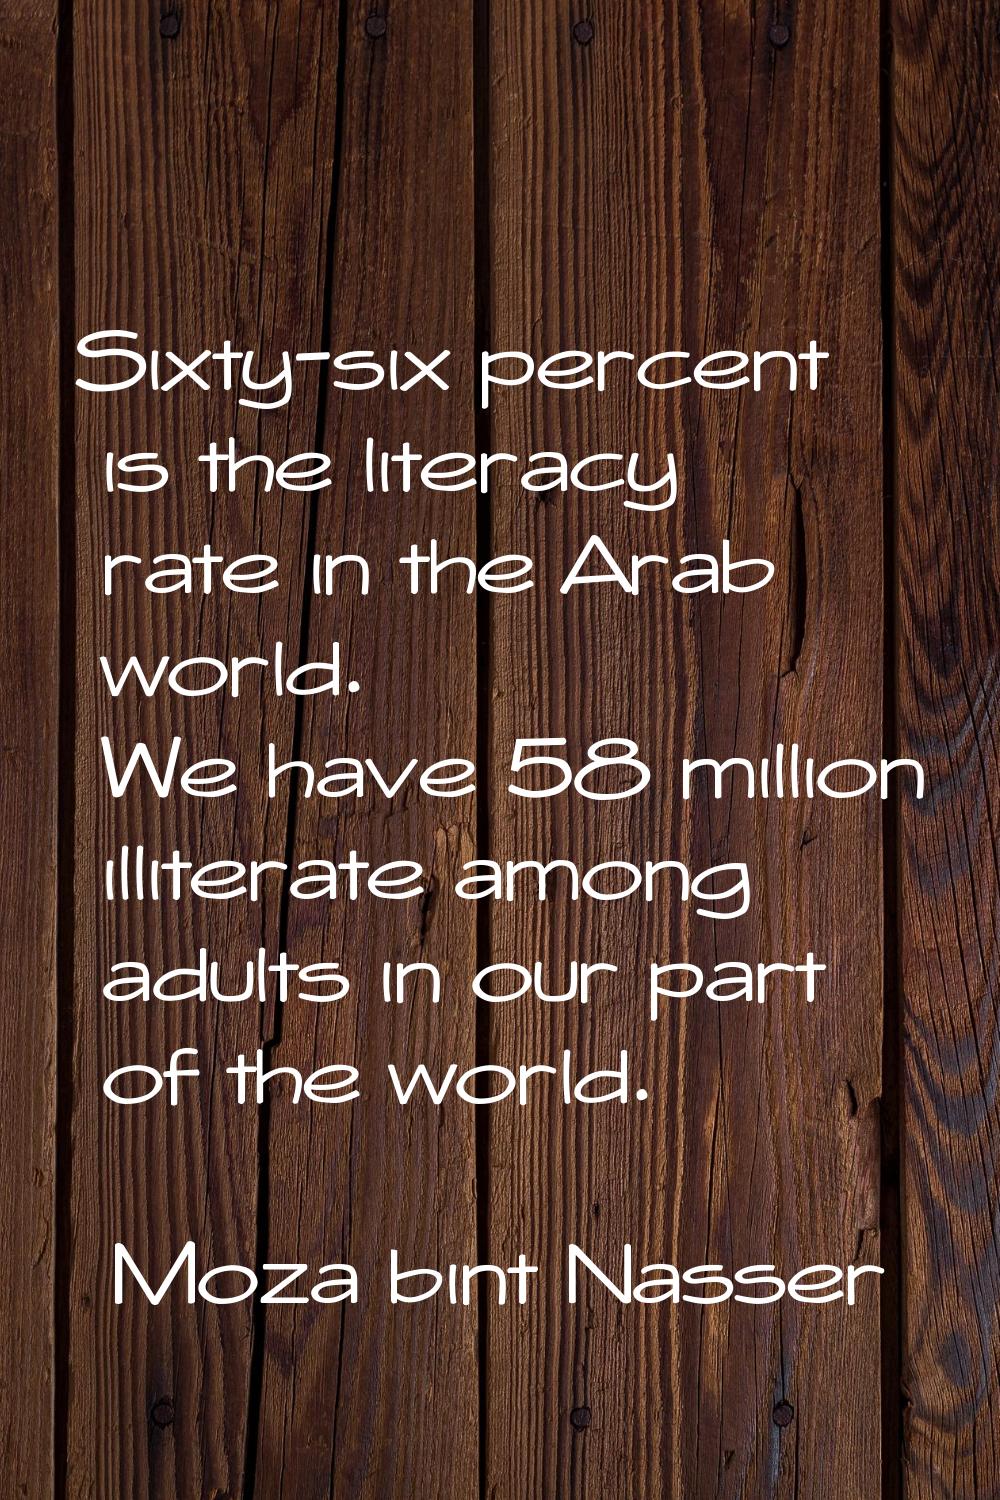 Sixty-six percent is the literacy rate in the Arab world. We have 58 million illiterate among adult